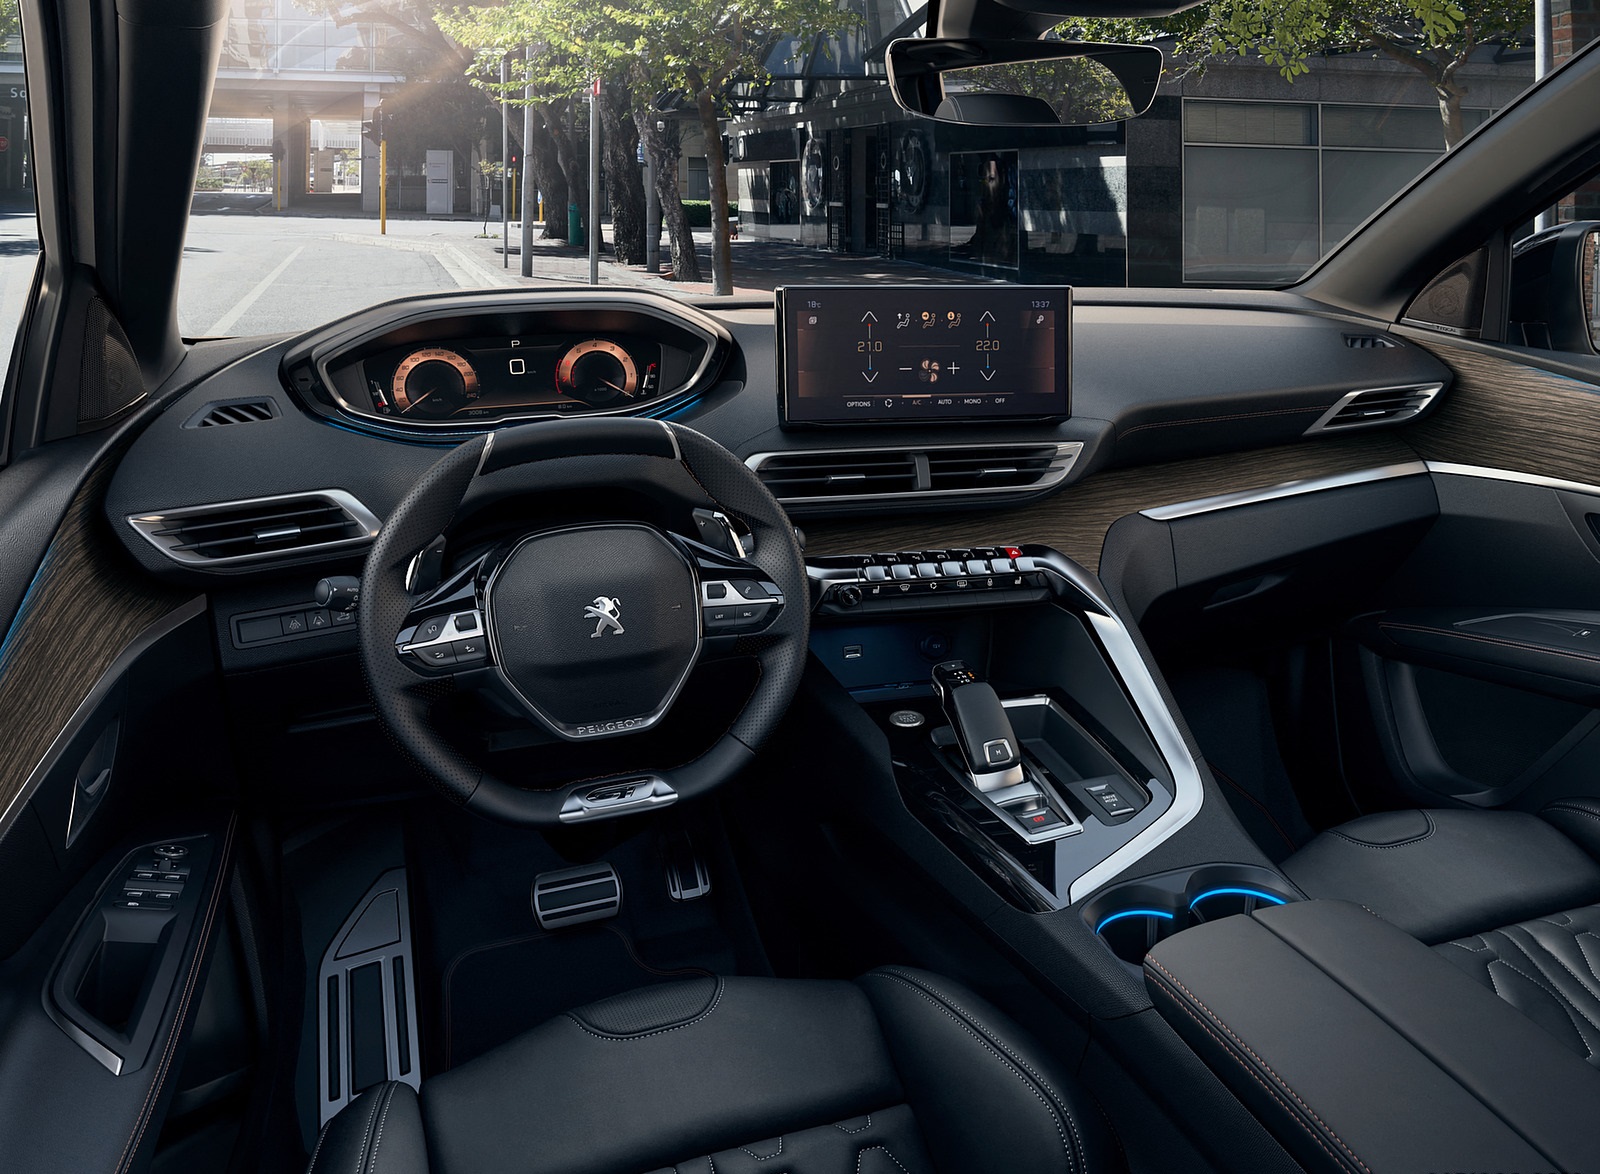 2021 Peugeot 5008 Interior Cockpit Wallpapers #15 of 25